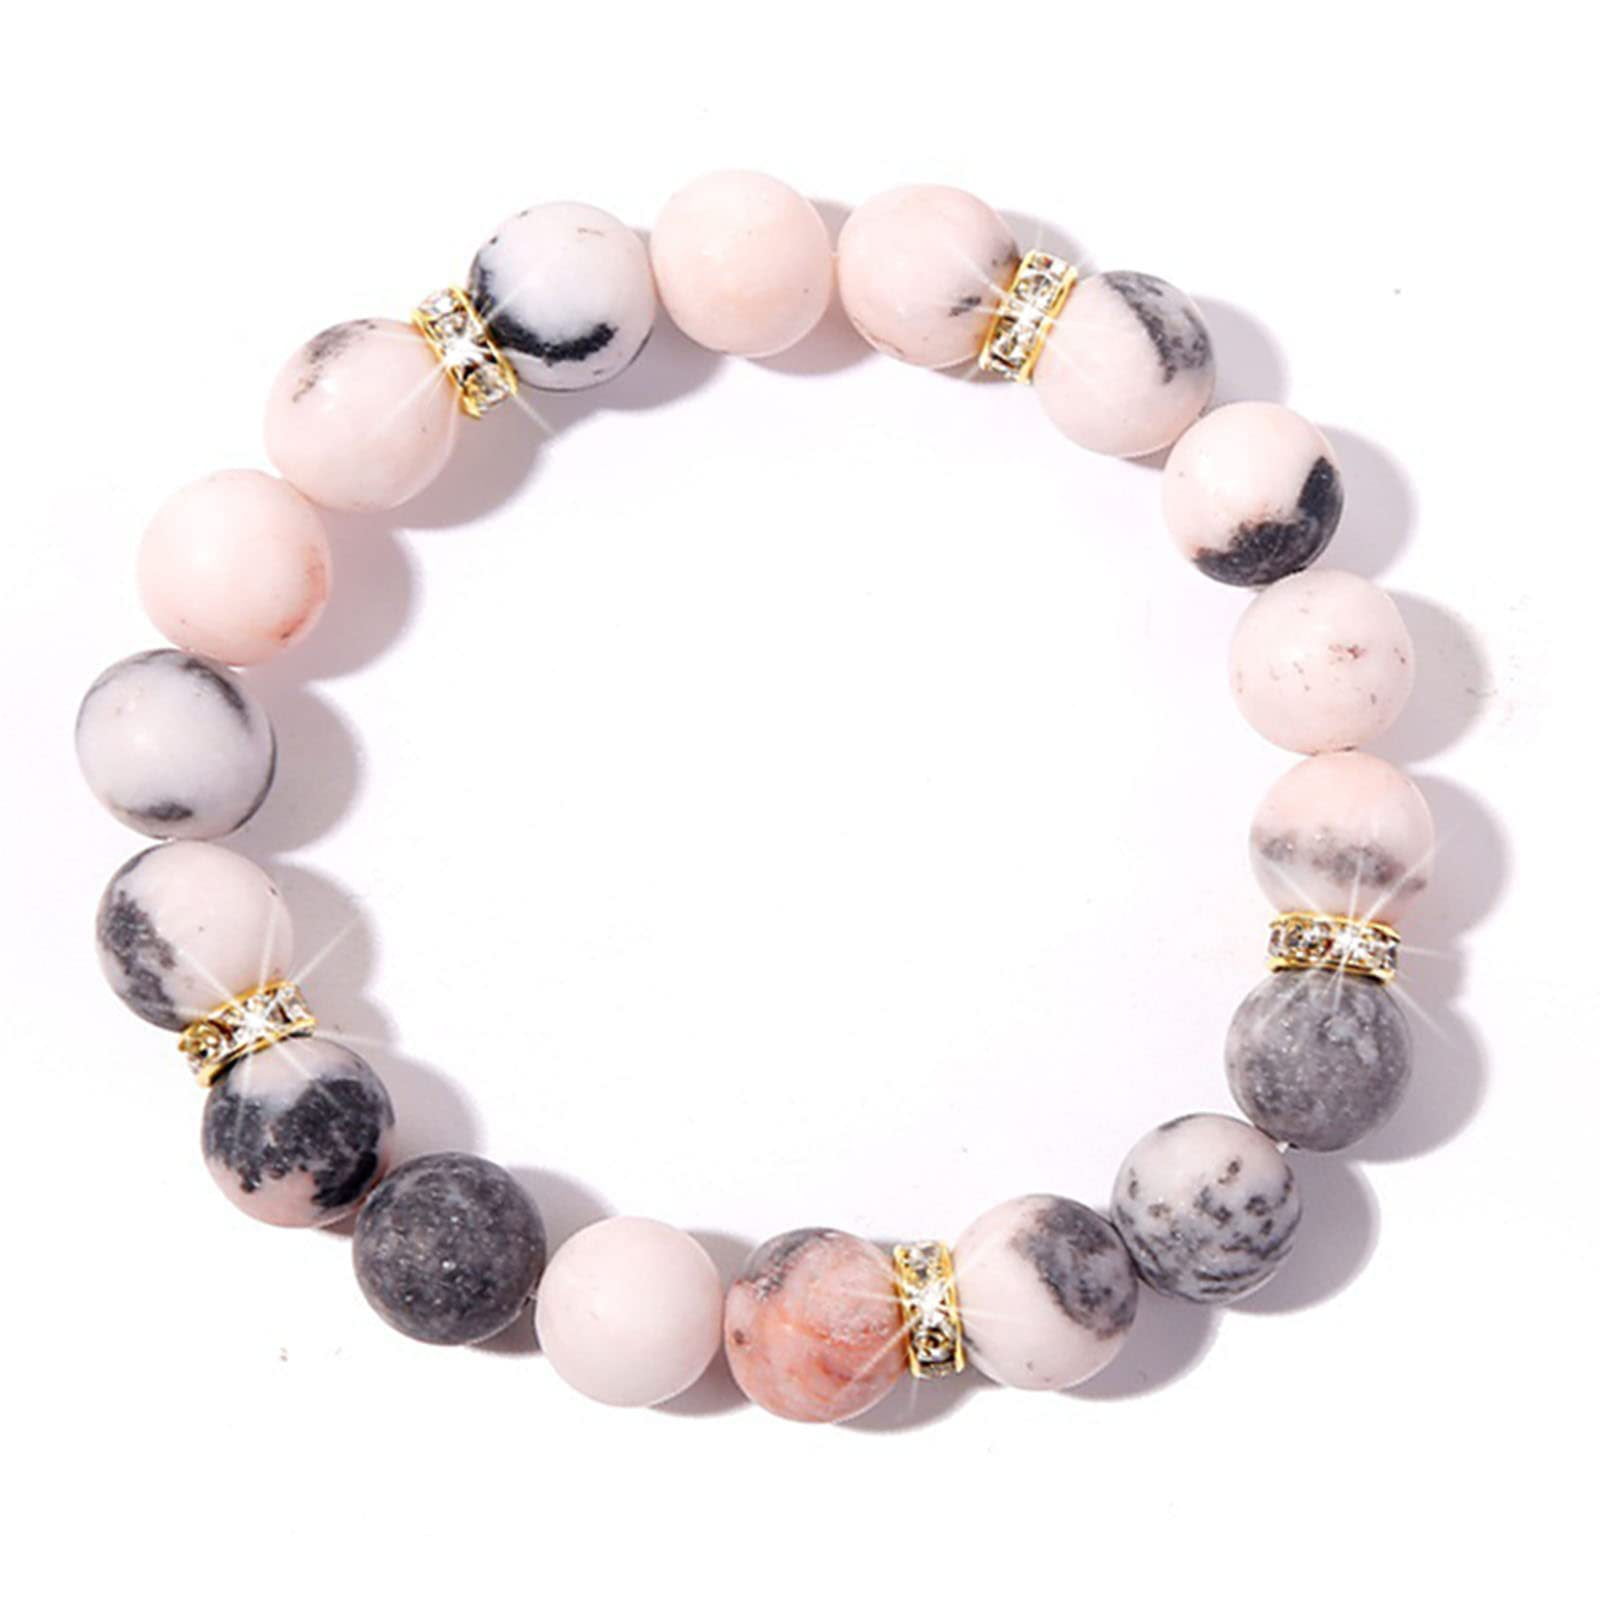 Calming Stretch Crystal Gemstone Bracelet - Soul Cafe Gift Box and Tag –  SoulCafeCrystals